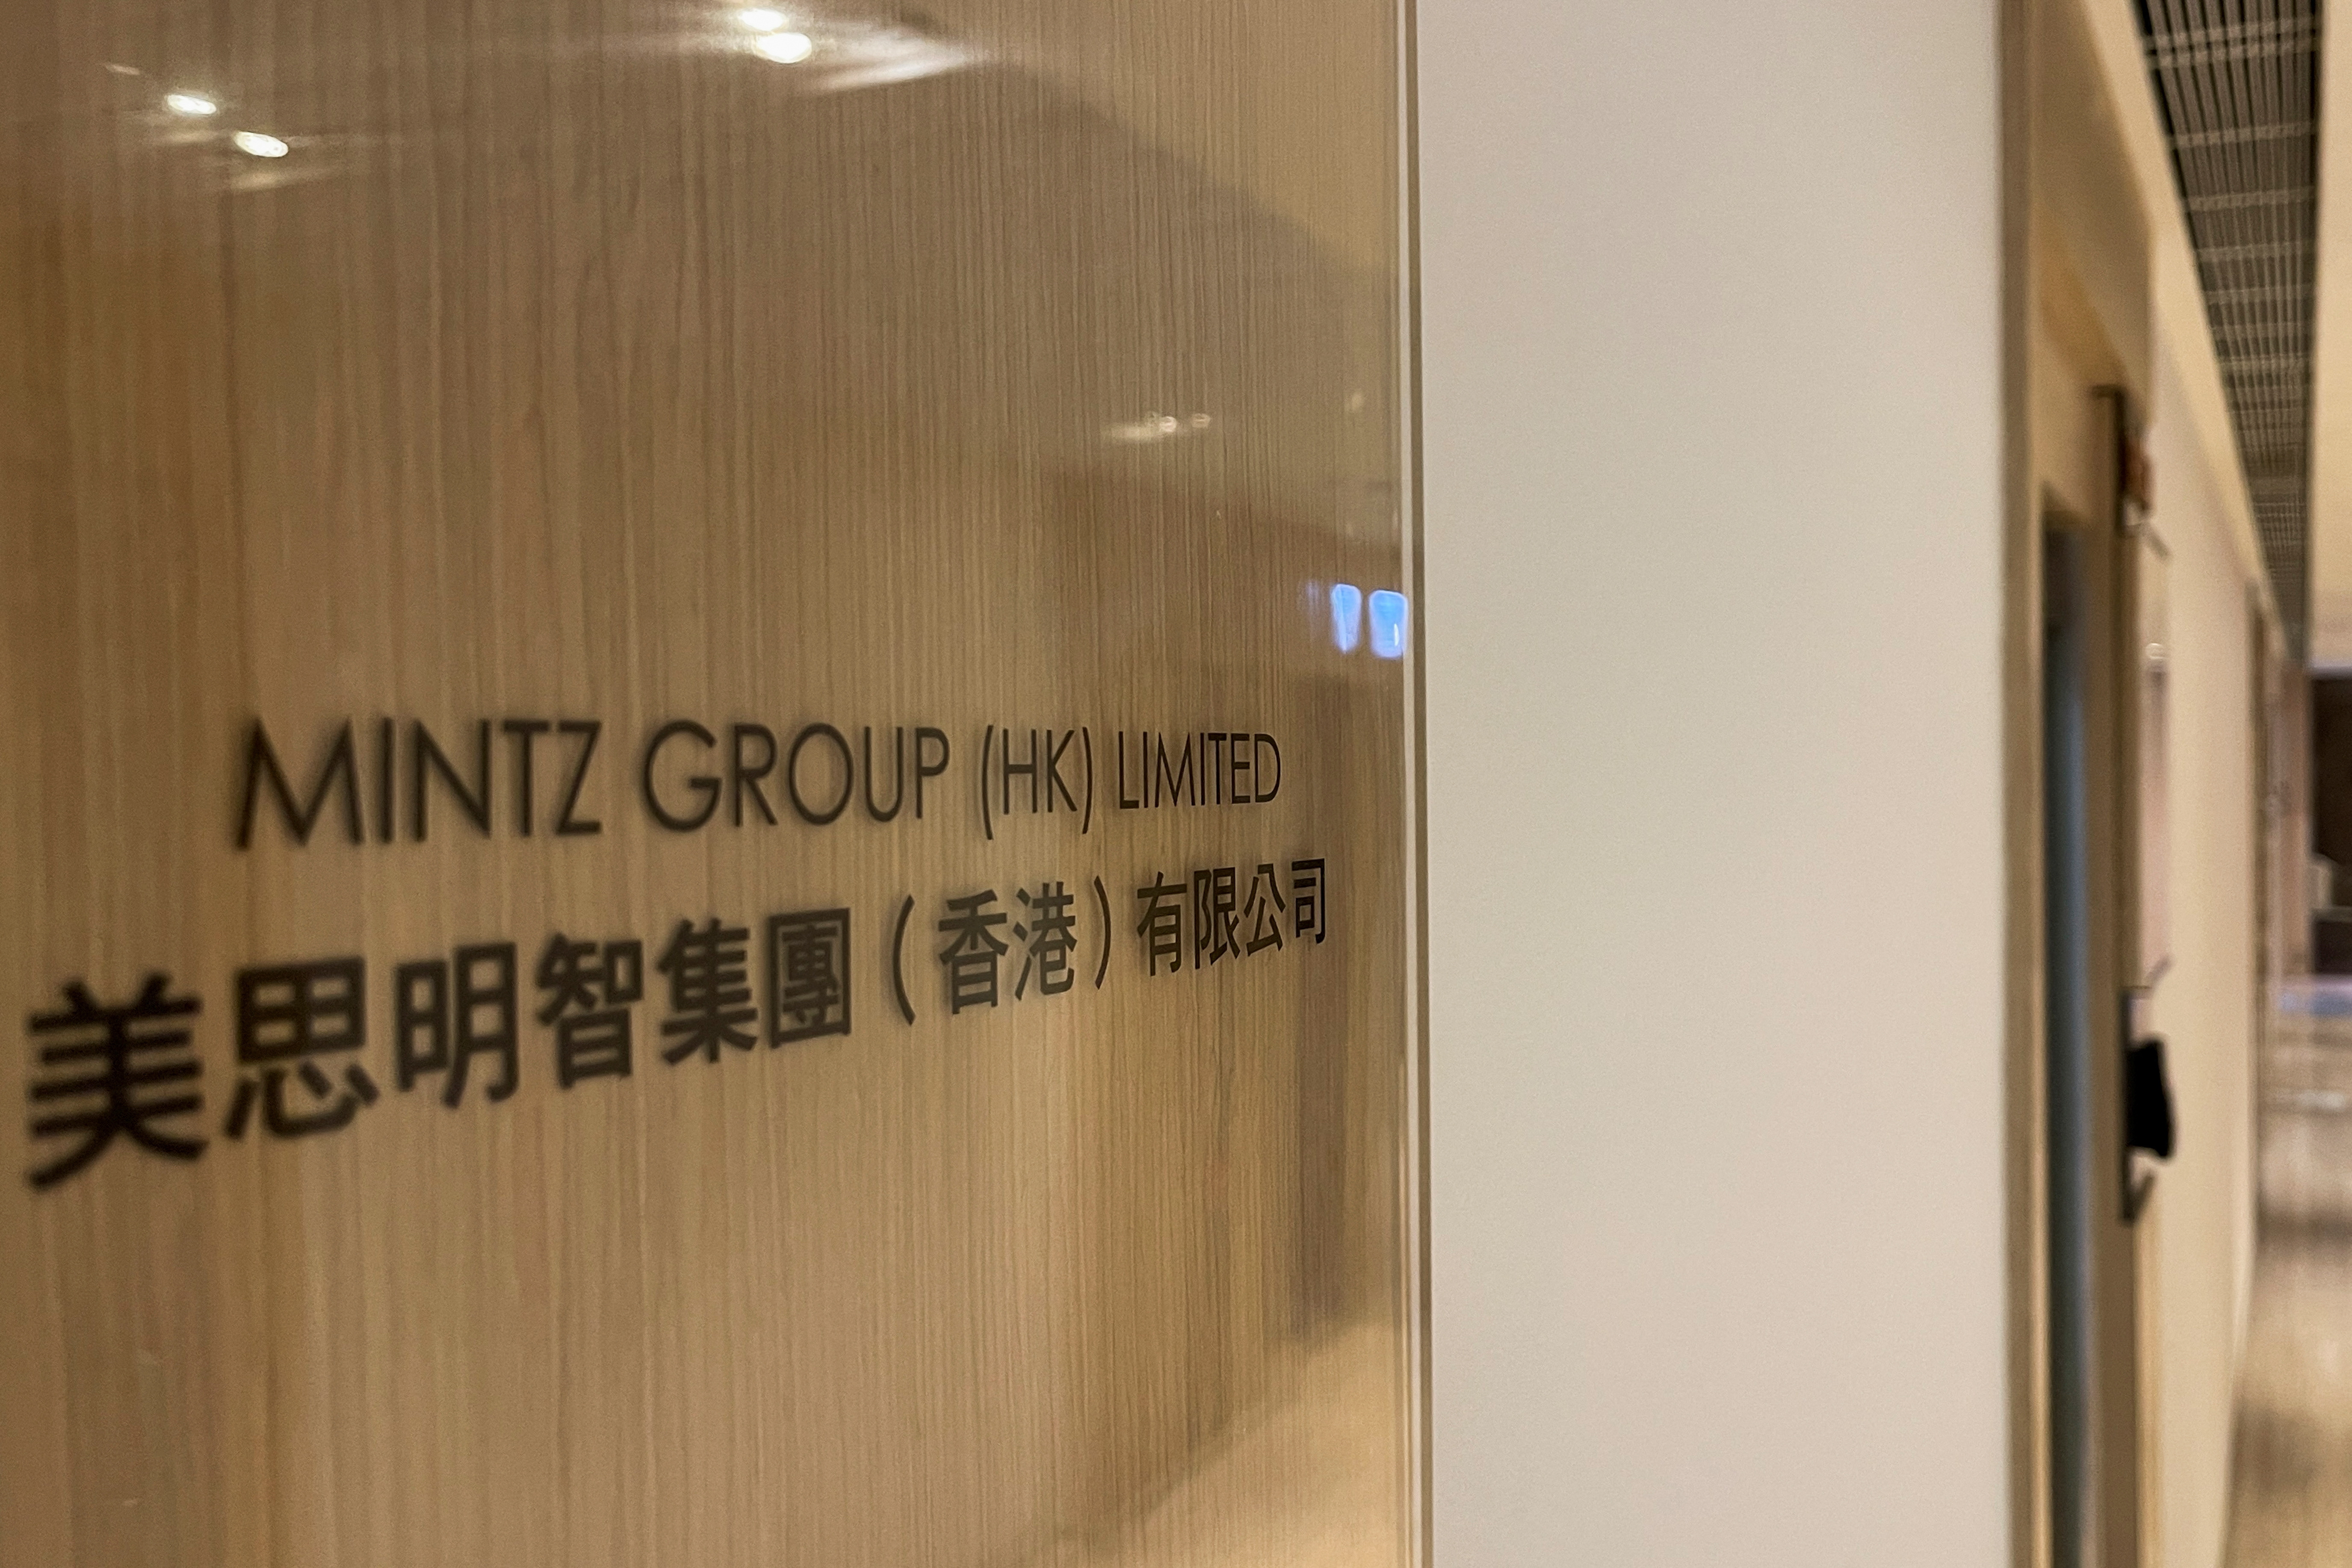 The U.S. corporate due diligence firm Mintz Group's office is seen in Hong Kong